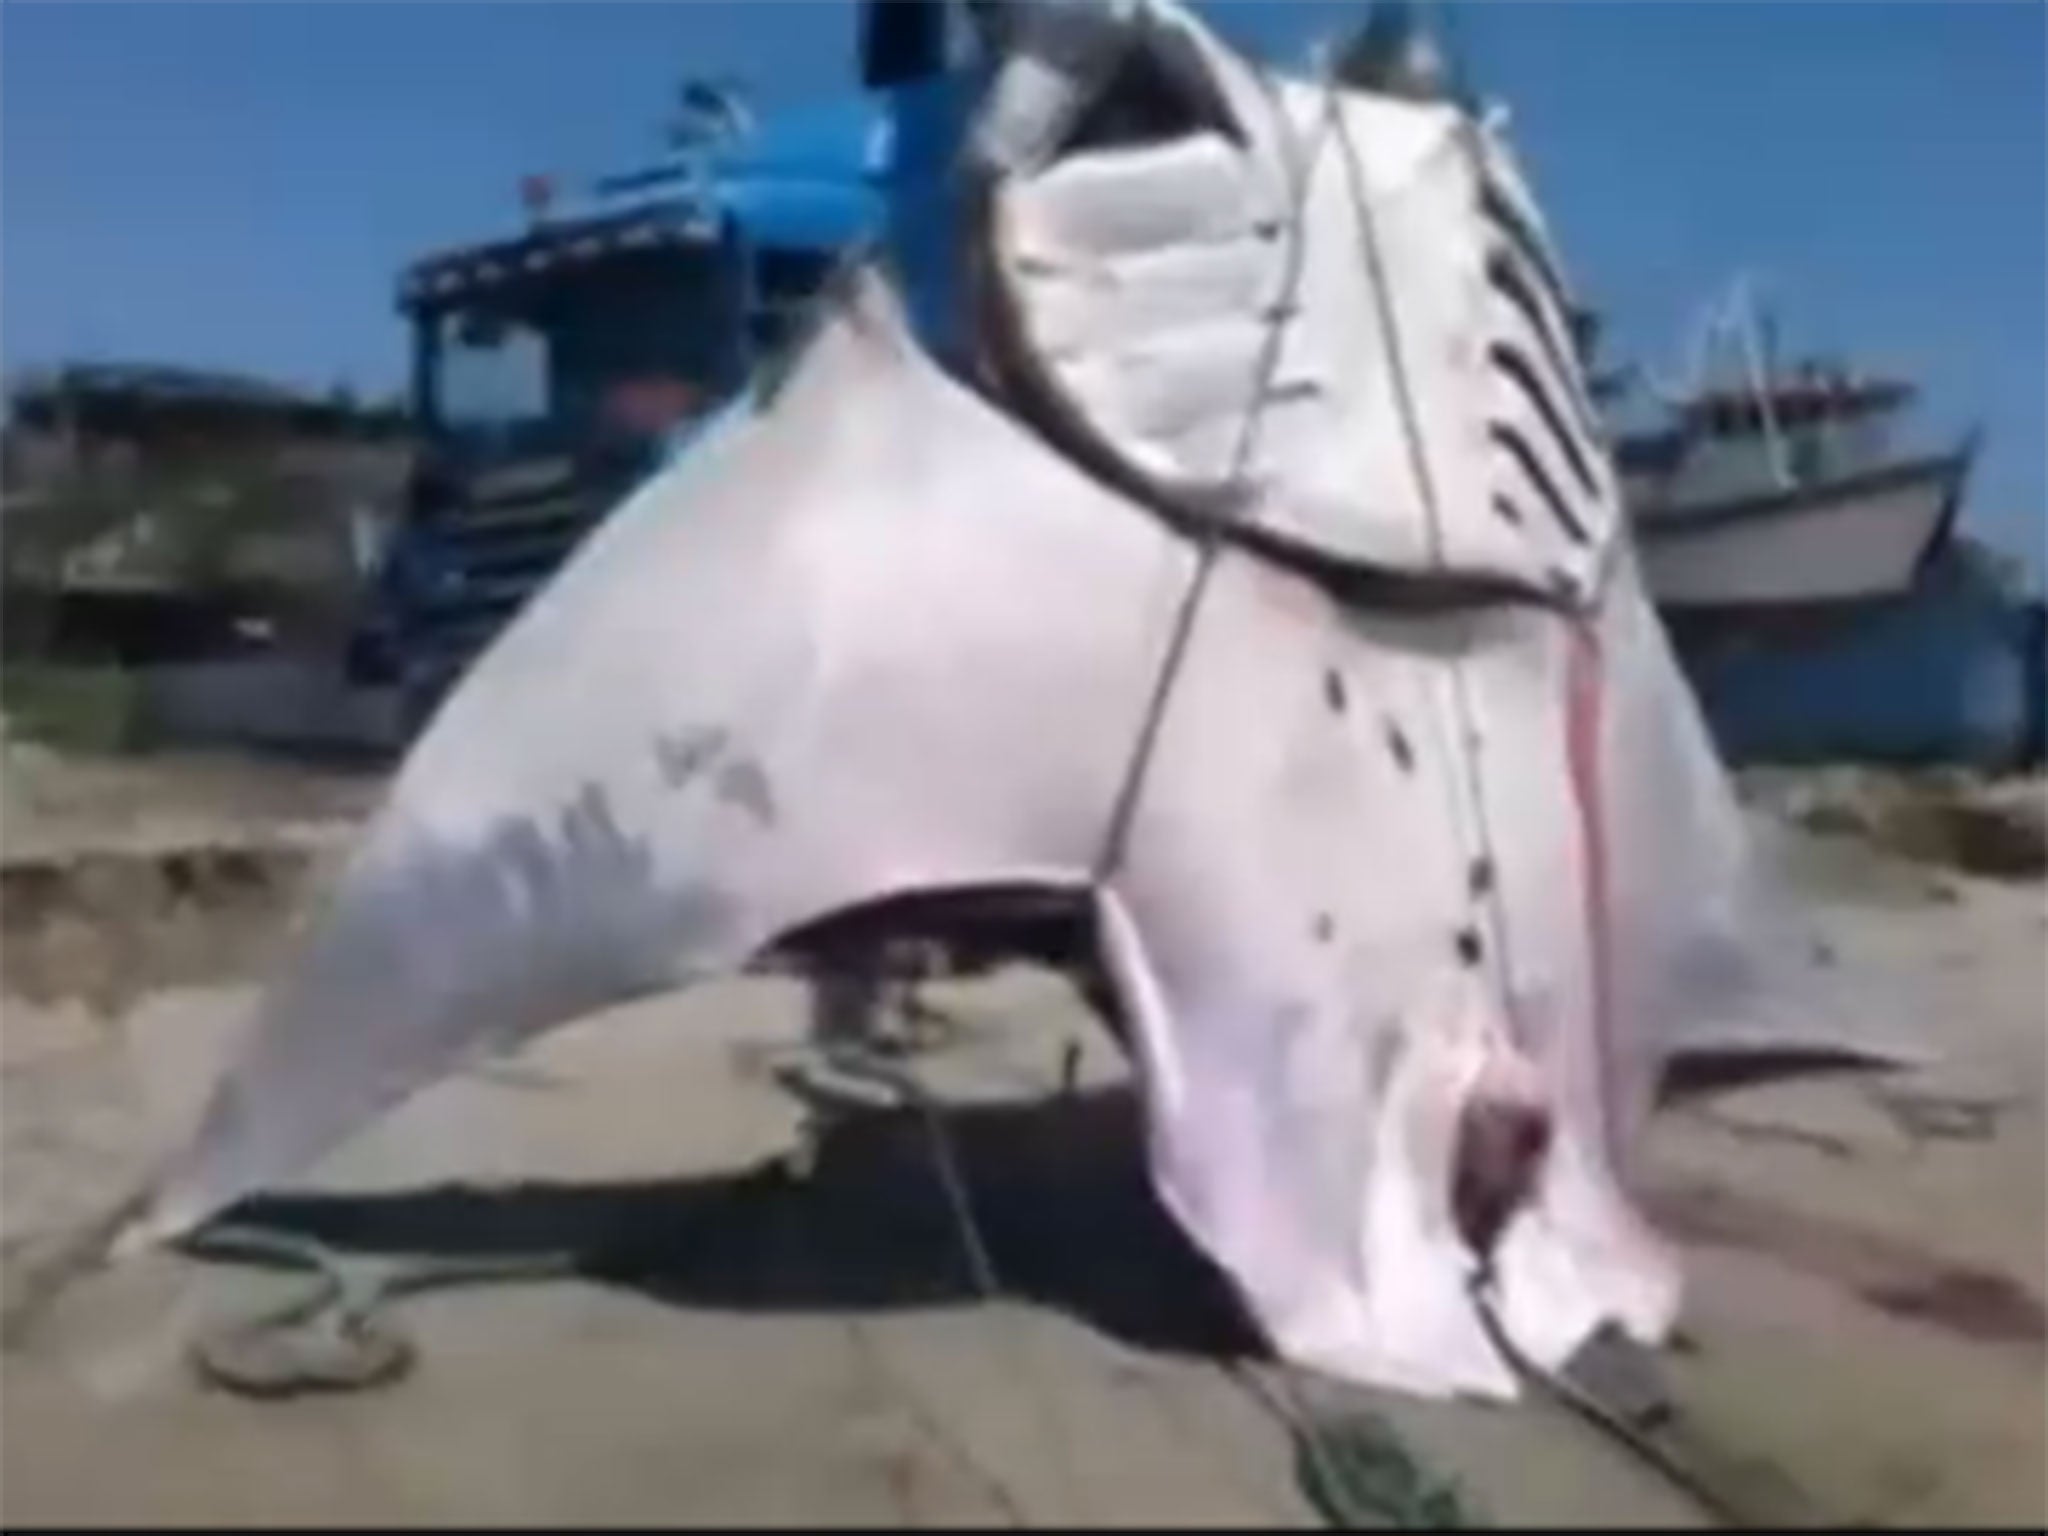 The manta ray weighed over a tonne